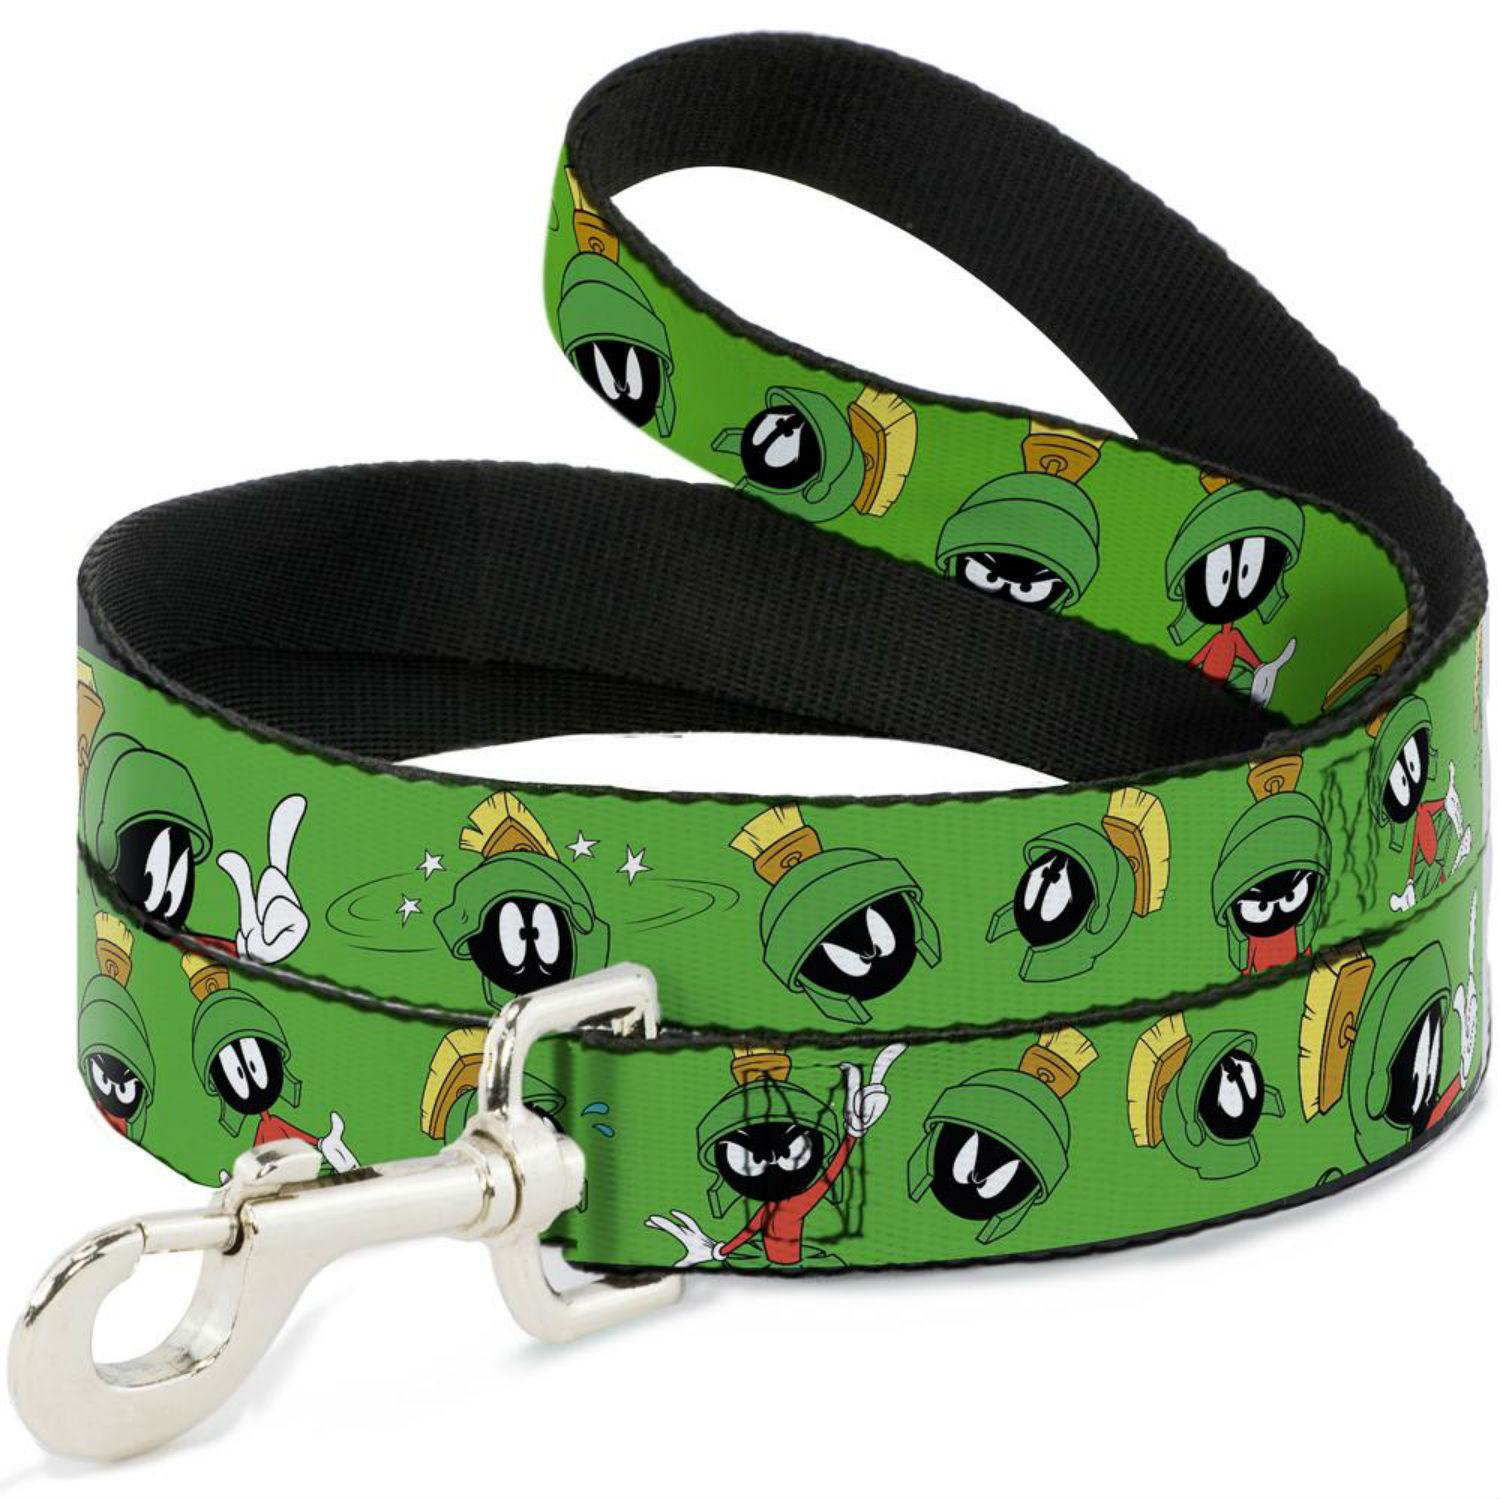 Marvin the Martian Dog Leash by Buckle-Down 